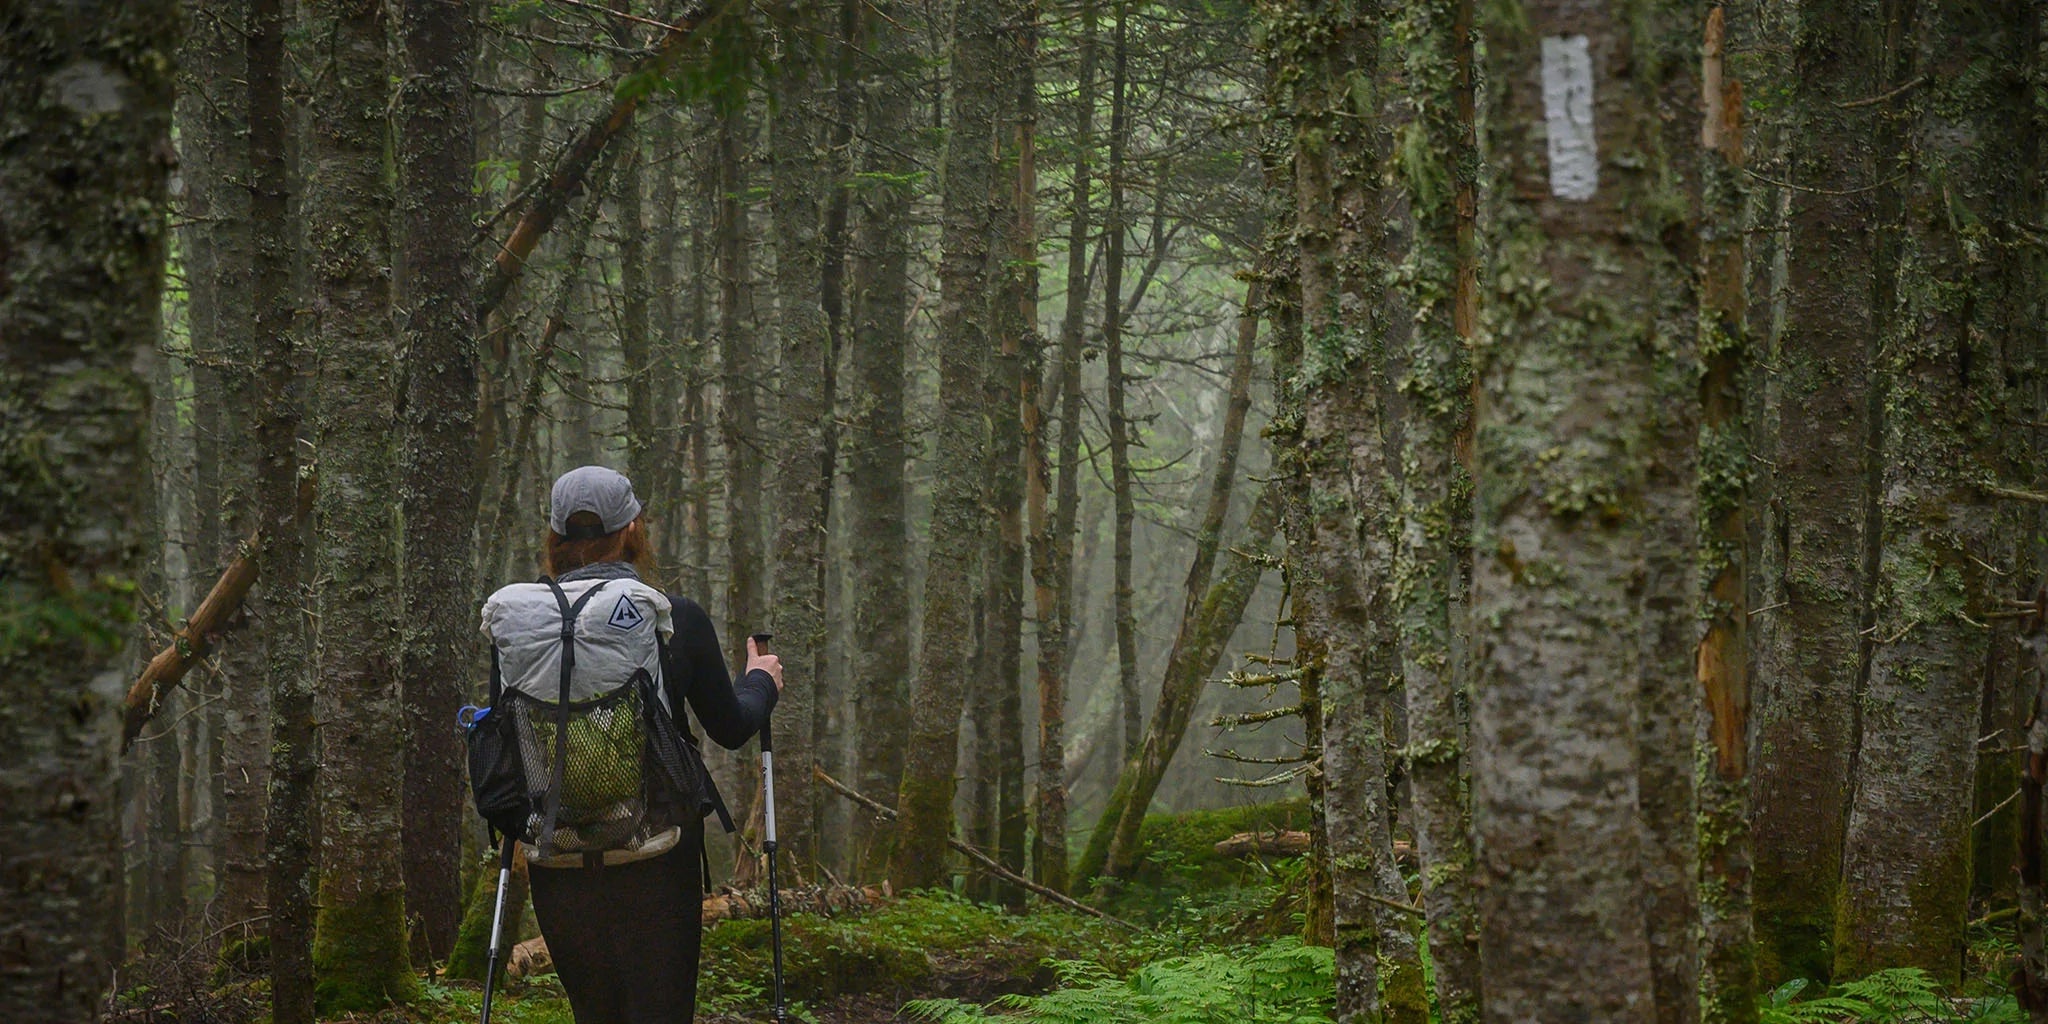 A person hiking through a forest with a backpack.